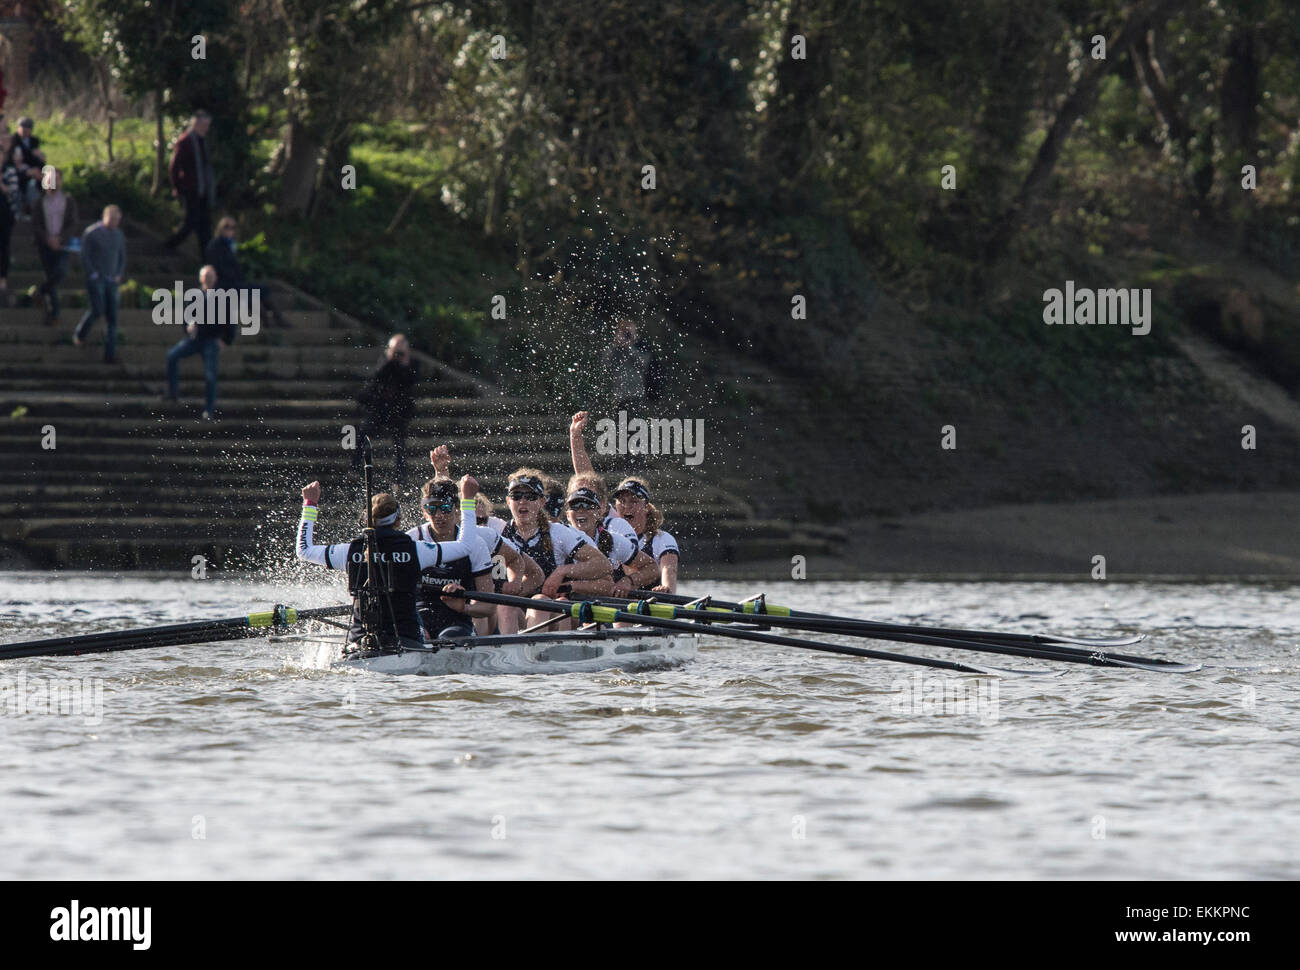 London, UK. 11th April, 2015. Oxford University Women's Boat Club (OUWBC) [dark blue] and Cambridge University Women's Boat Club (CUWBC) [light blue] make history by competing in the first ever women’s race to be held on the traditional Men’s Tideway course between Putney and Mortlake.  OUWBC crew:- Bow: Maxie Scheske, 2: Anastasia Chitty, 3: Shelley Pearson, 4: Lauren Kedar, 5: Maddy Badcott, 6: Emily Reynolds, 7: Nadine Graedel Iberg, Stroke: Caryn Davies, Cox: Jennifer Her. Credit:  Duncan Grove/Alamy Live News Stock Photo